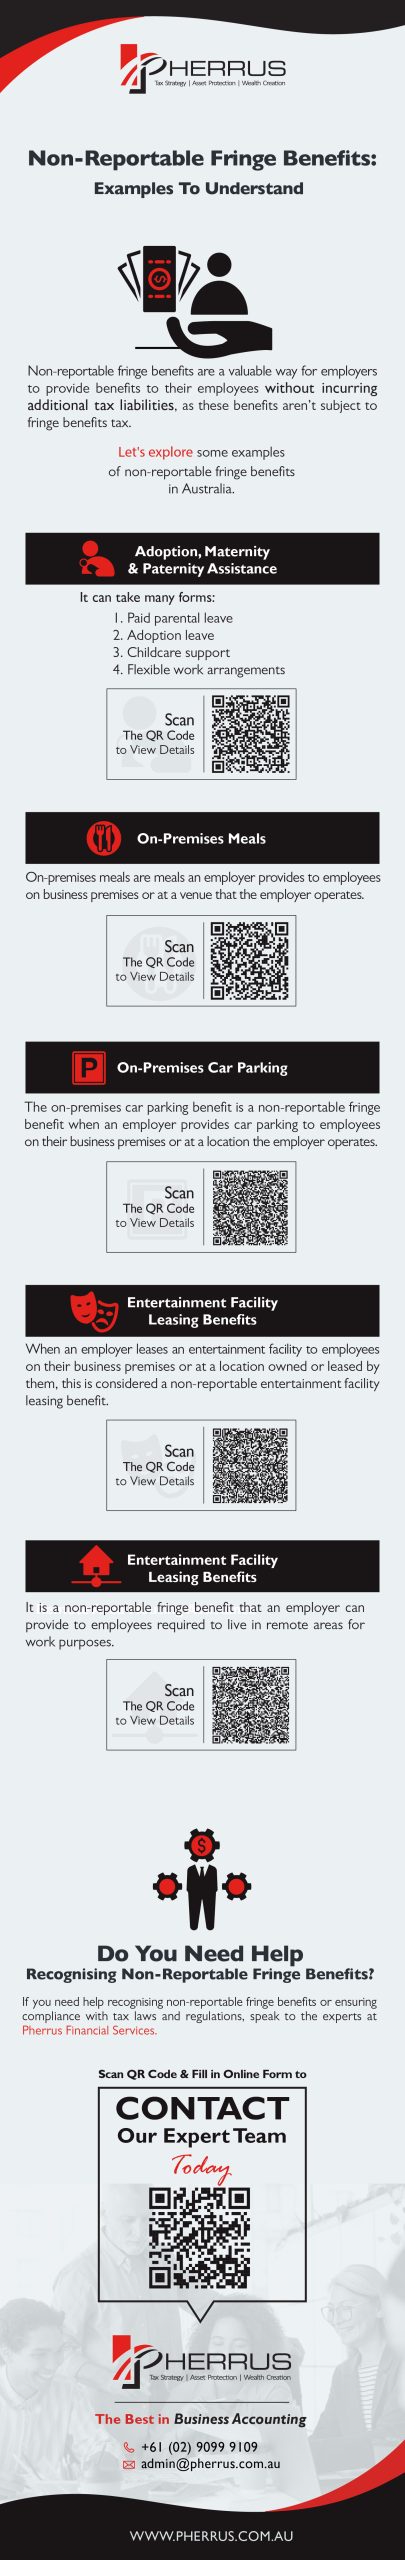 Non-Reportable Fringe Benefits - Examples To Understand Infographic